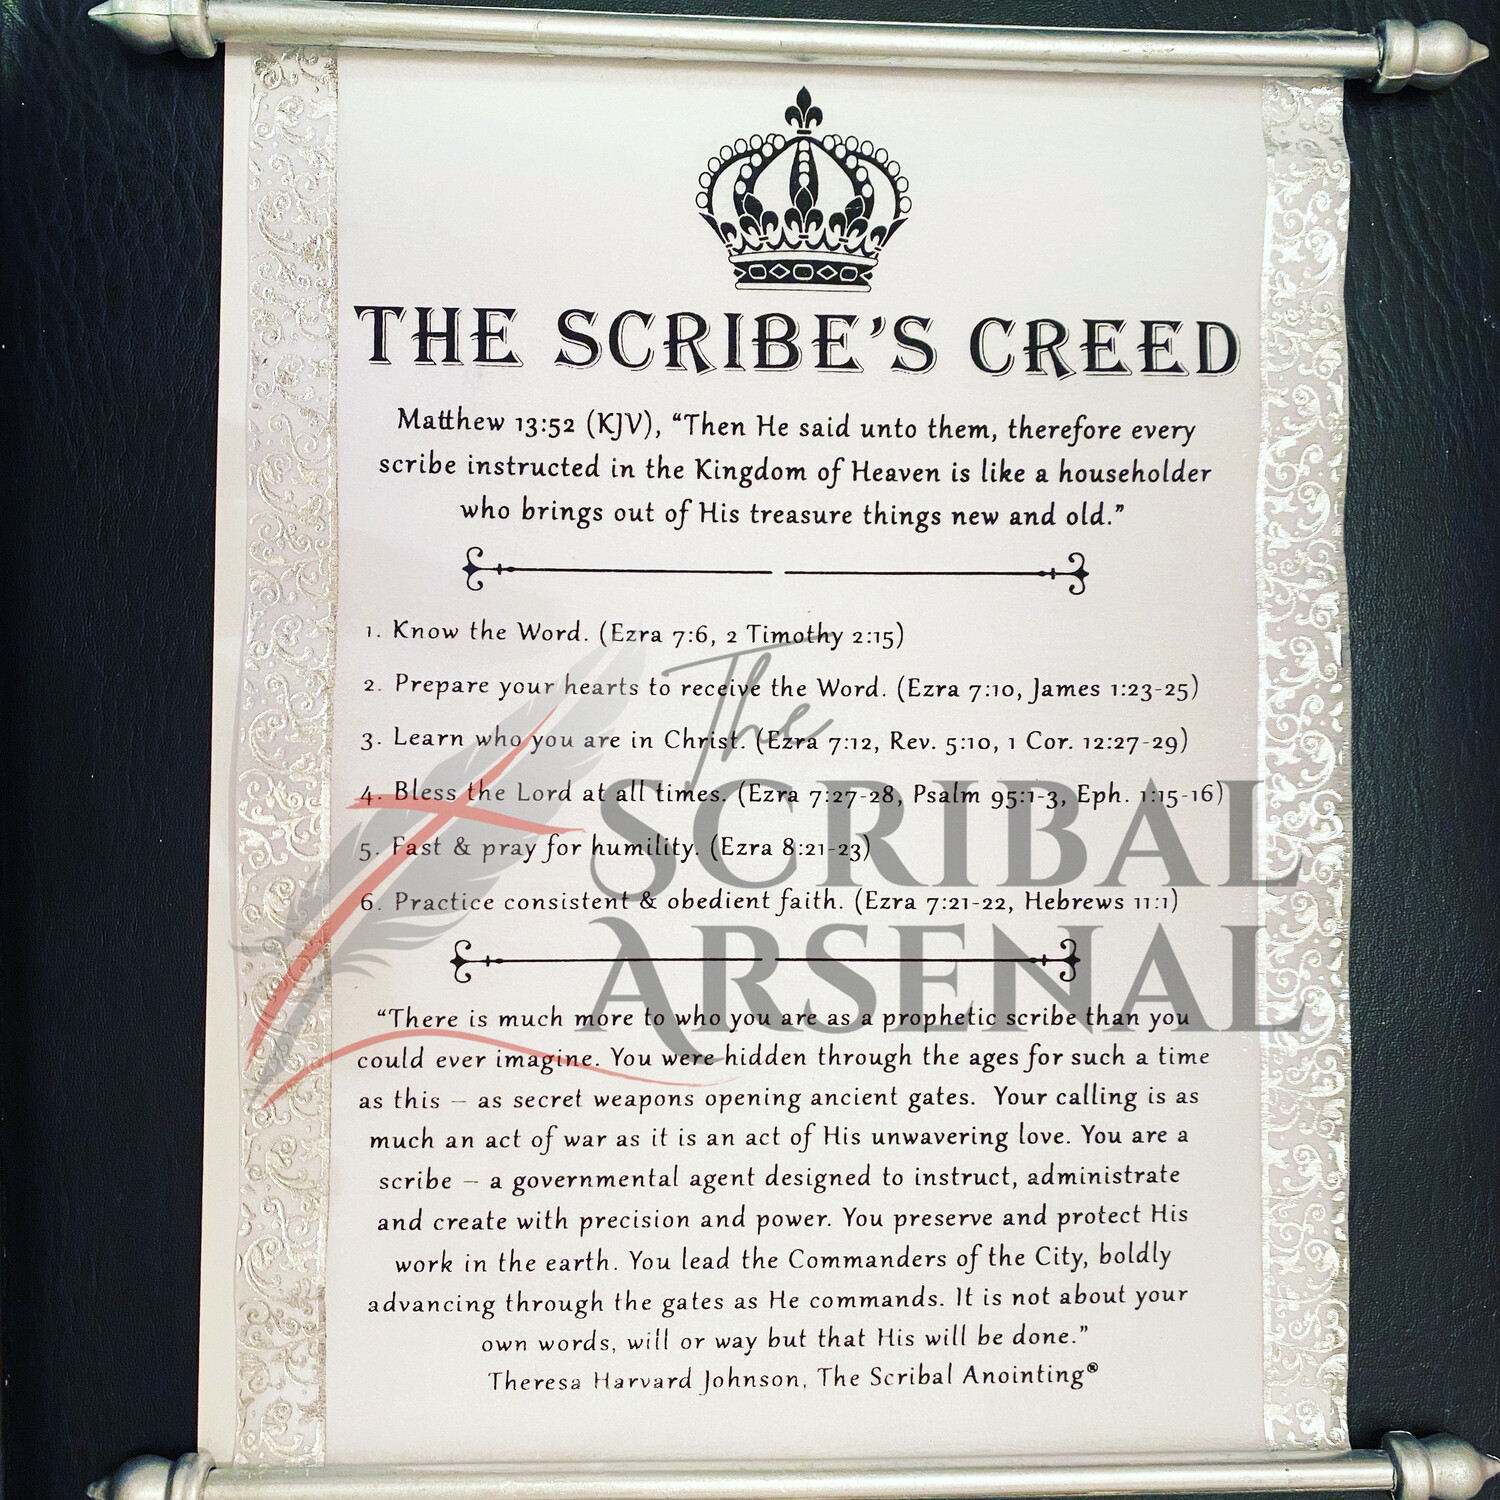 The Scribe's Creed